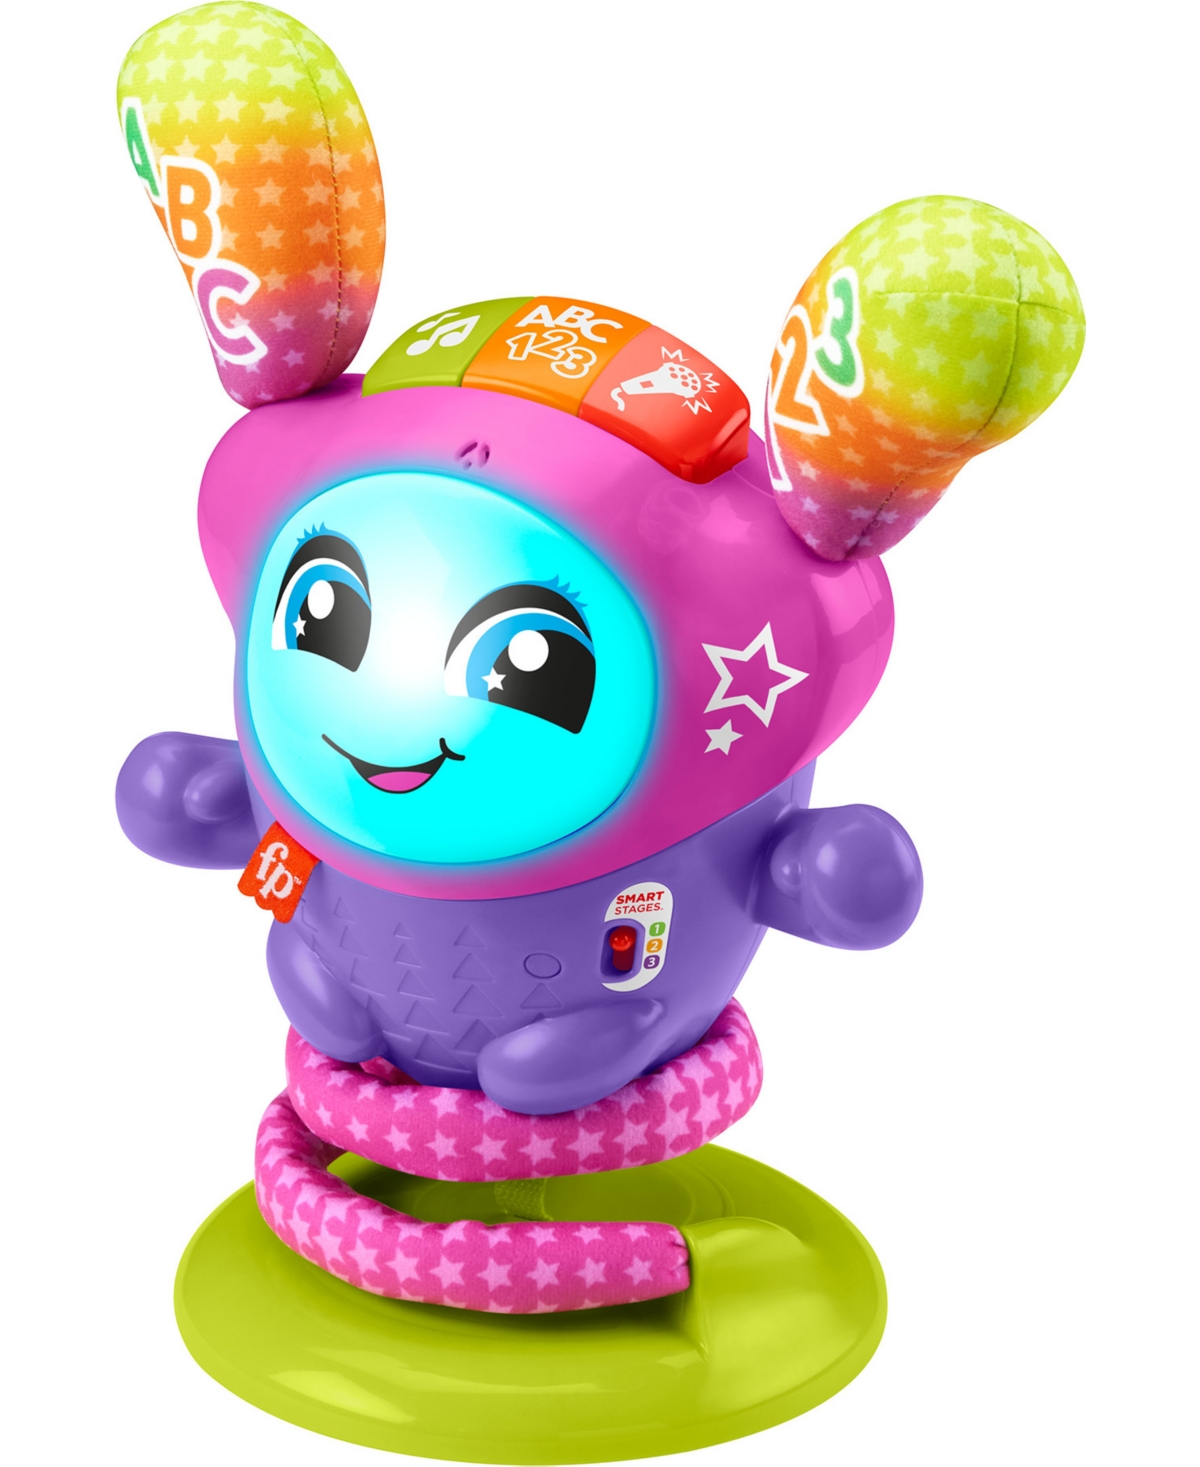 Fisher Price Dj Bouncin' Star, Baby Learning Toy With Music Lights And Bouncing Action In Multi-color